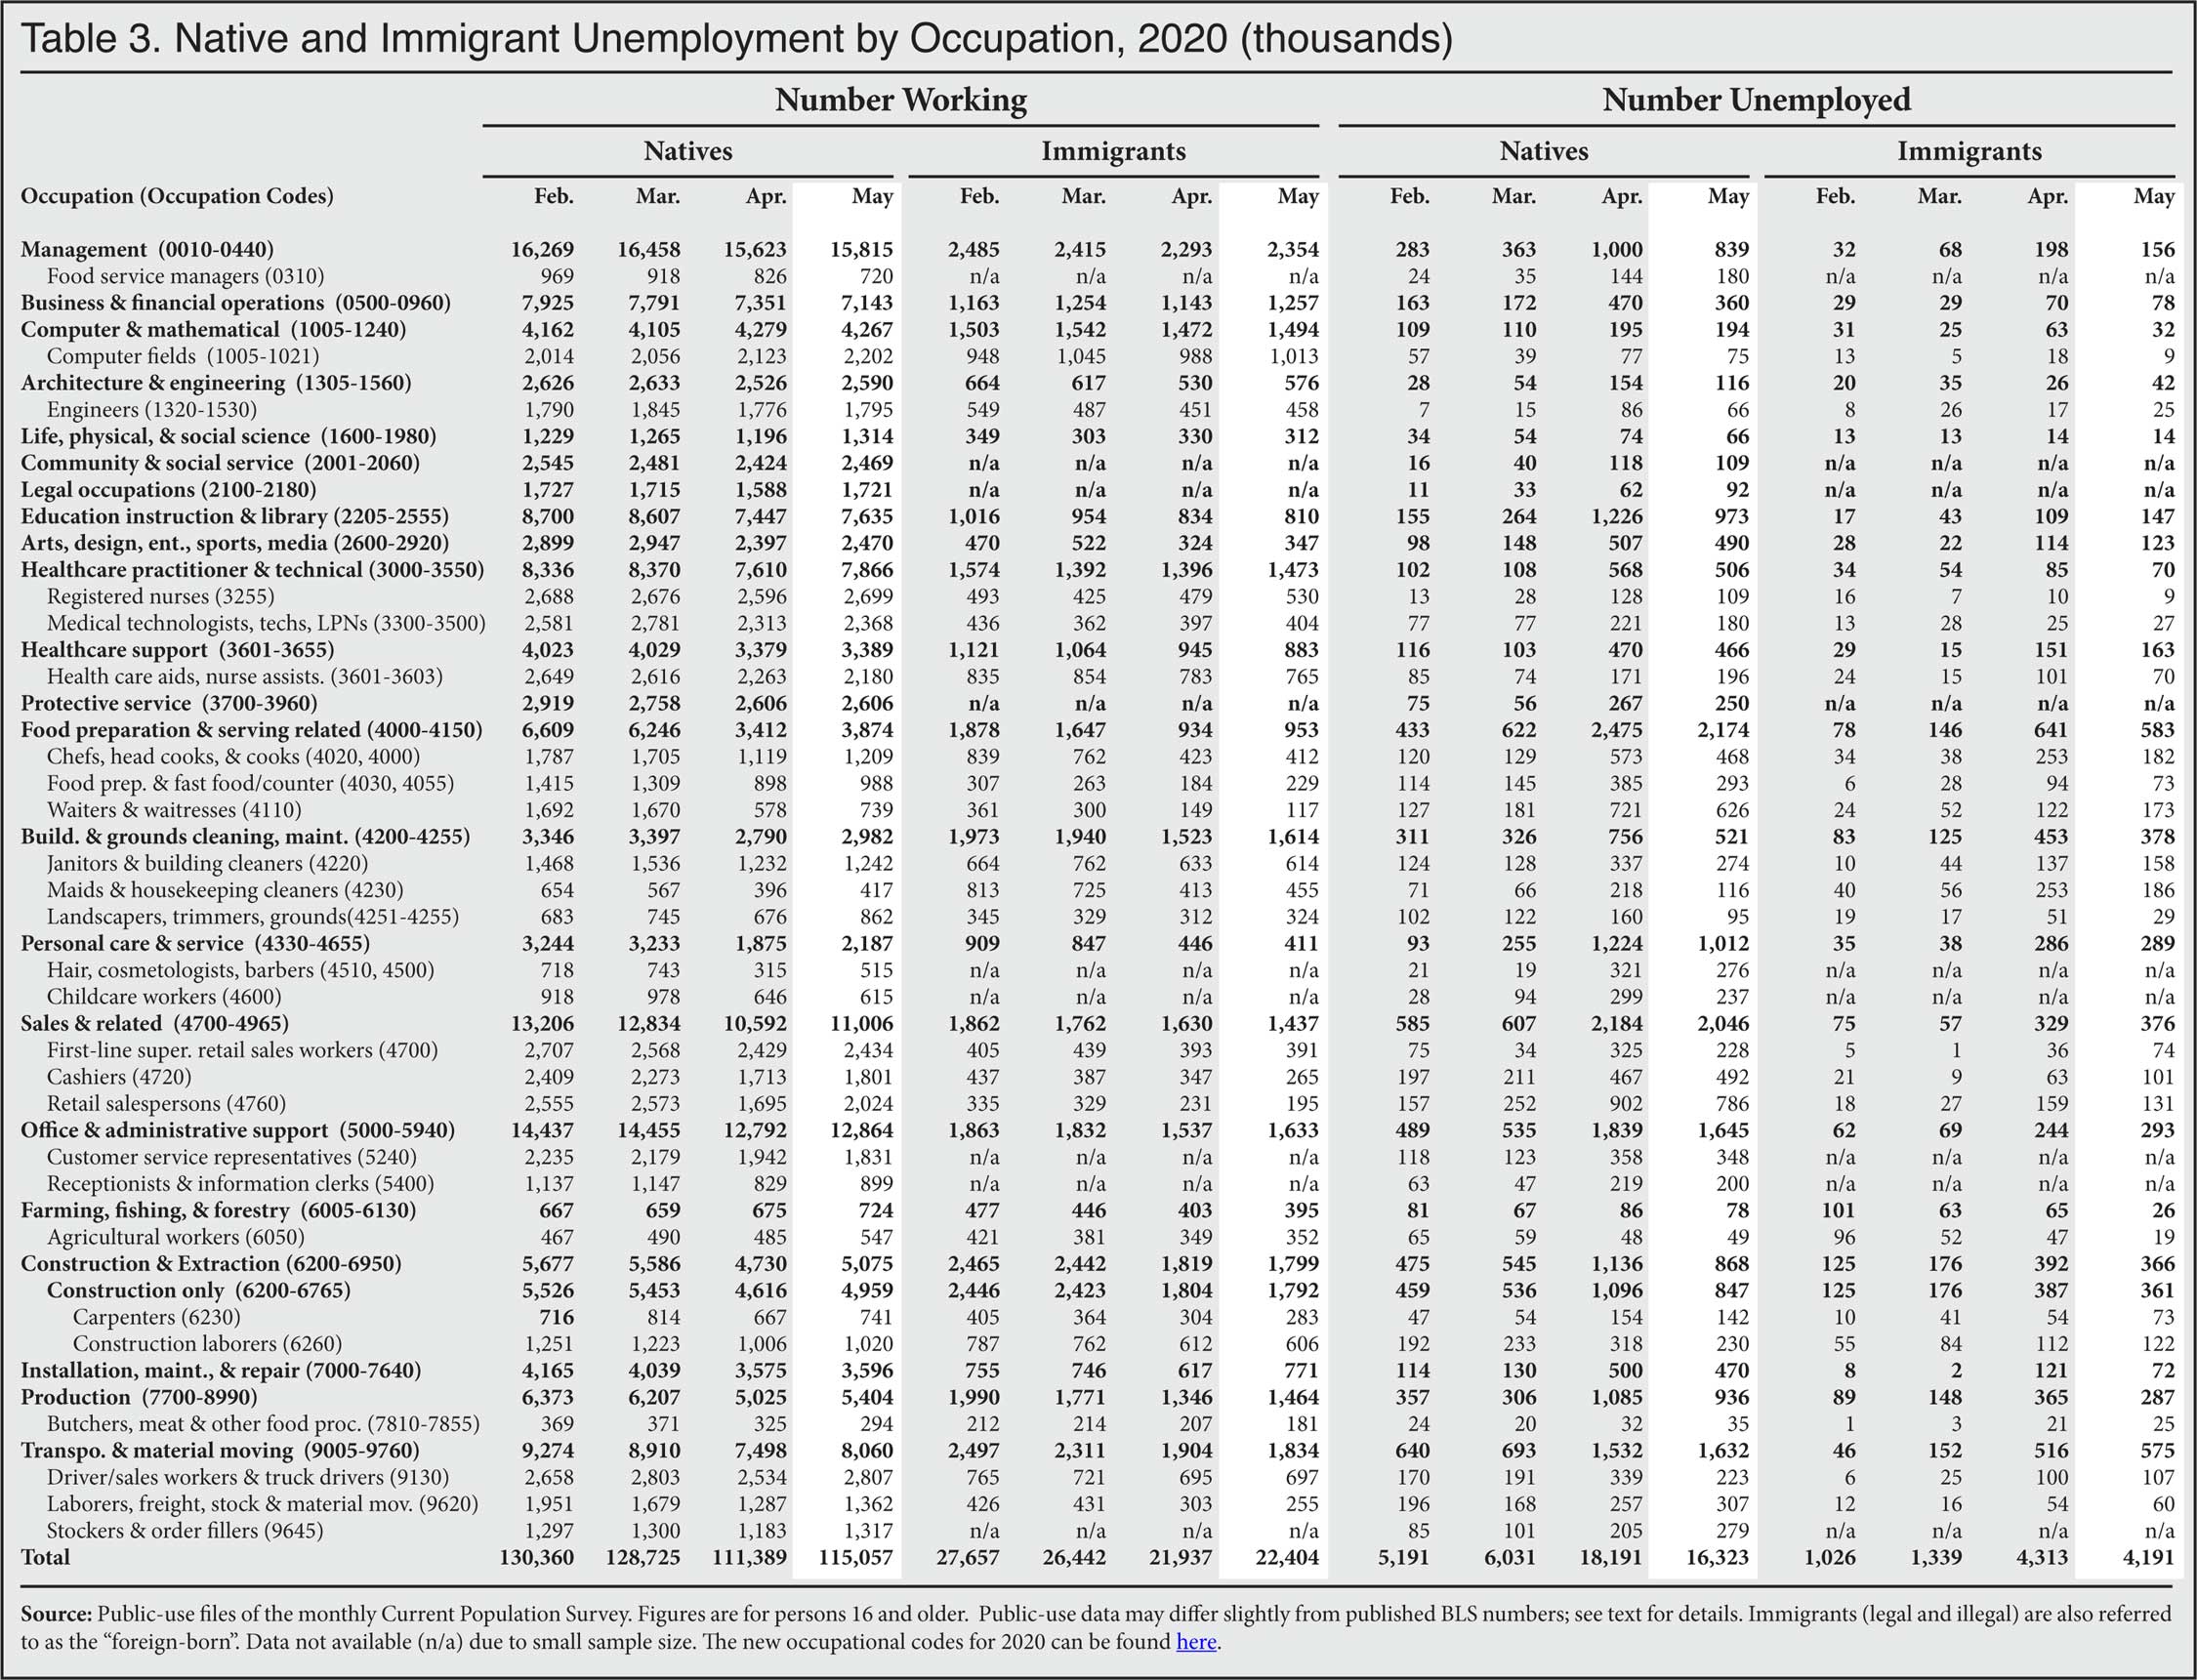 Table: Native and Immigrant Unemployment by Occupation, 2020